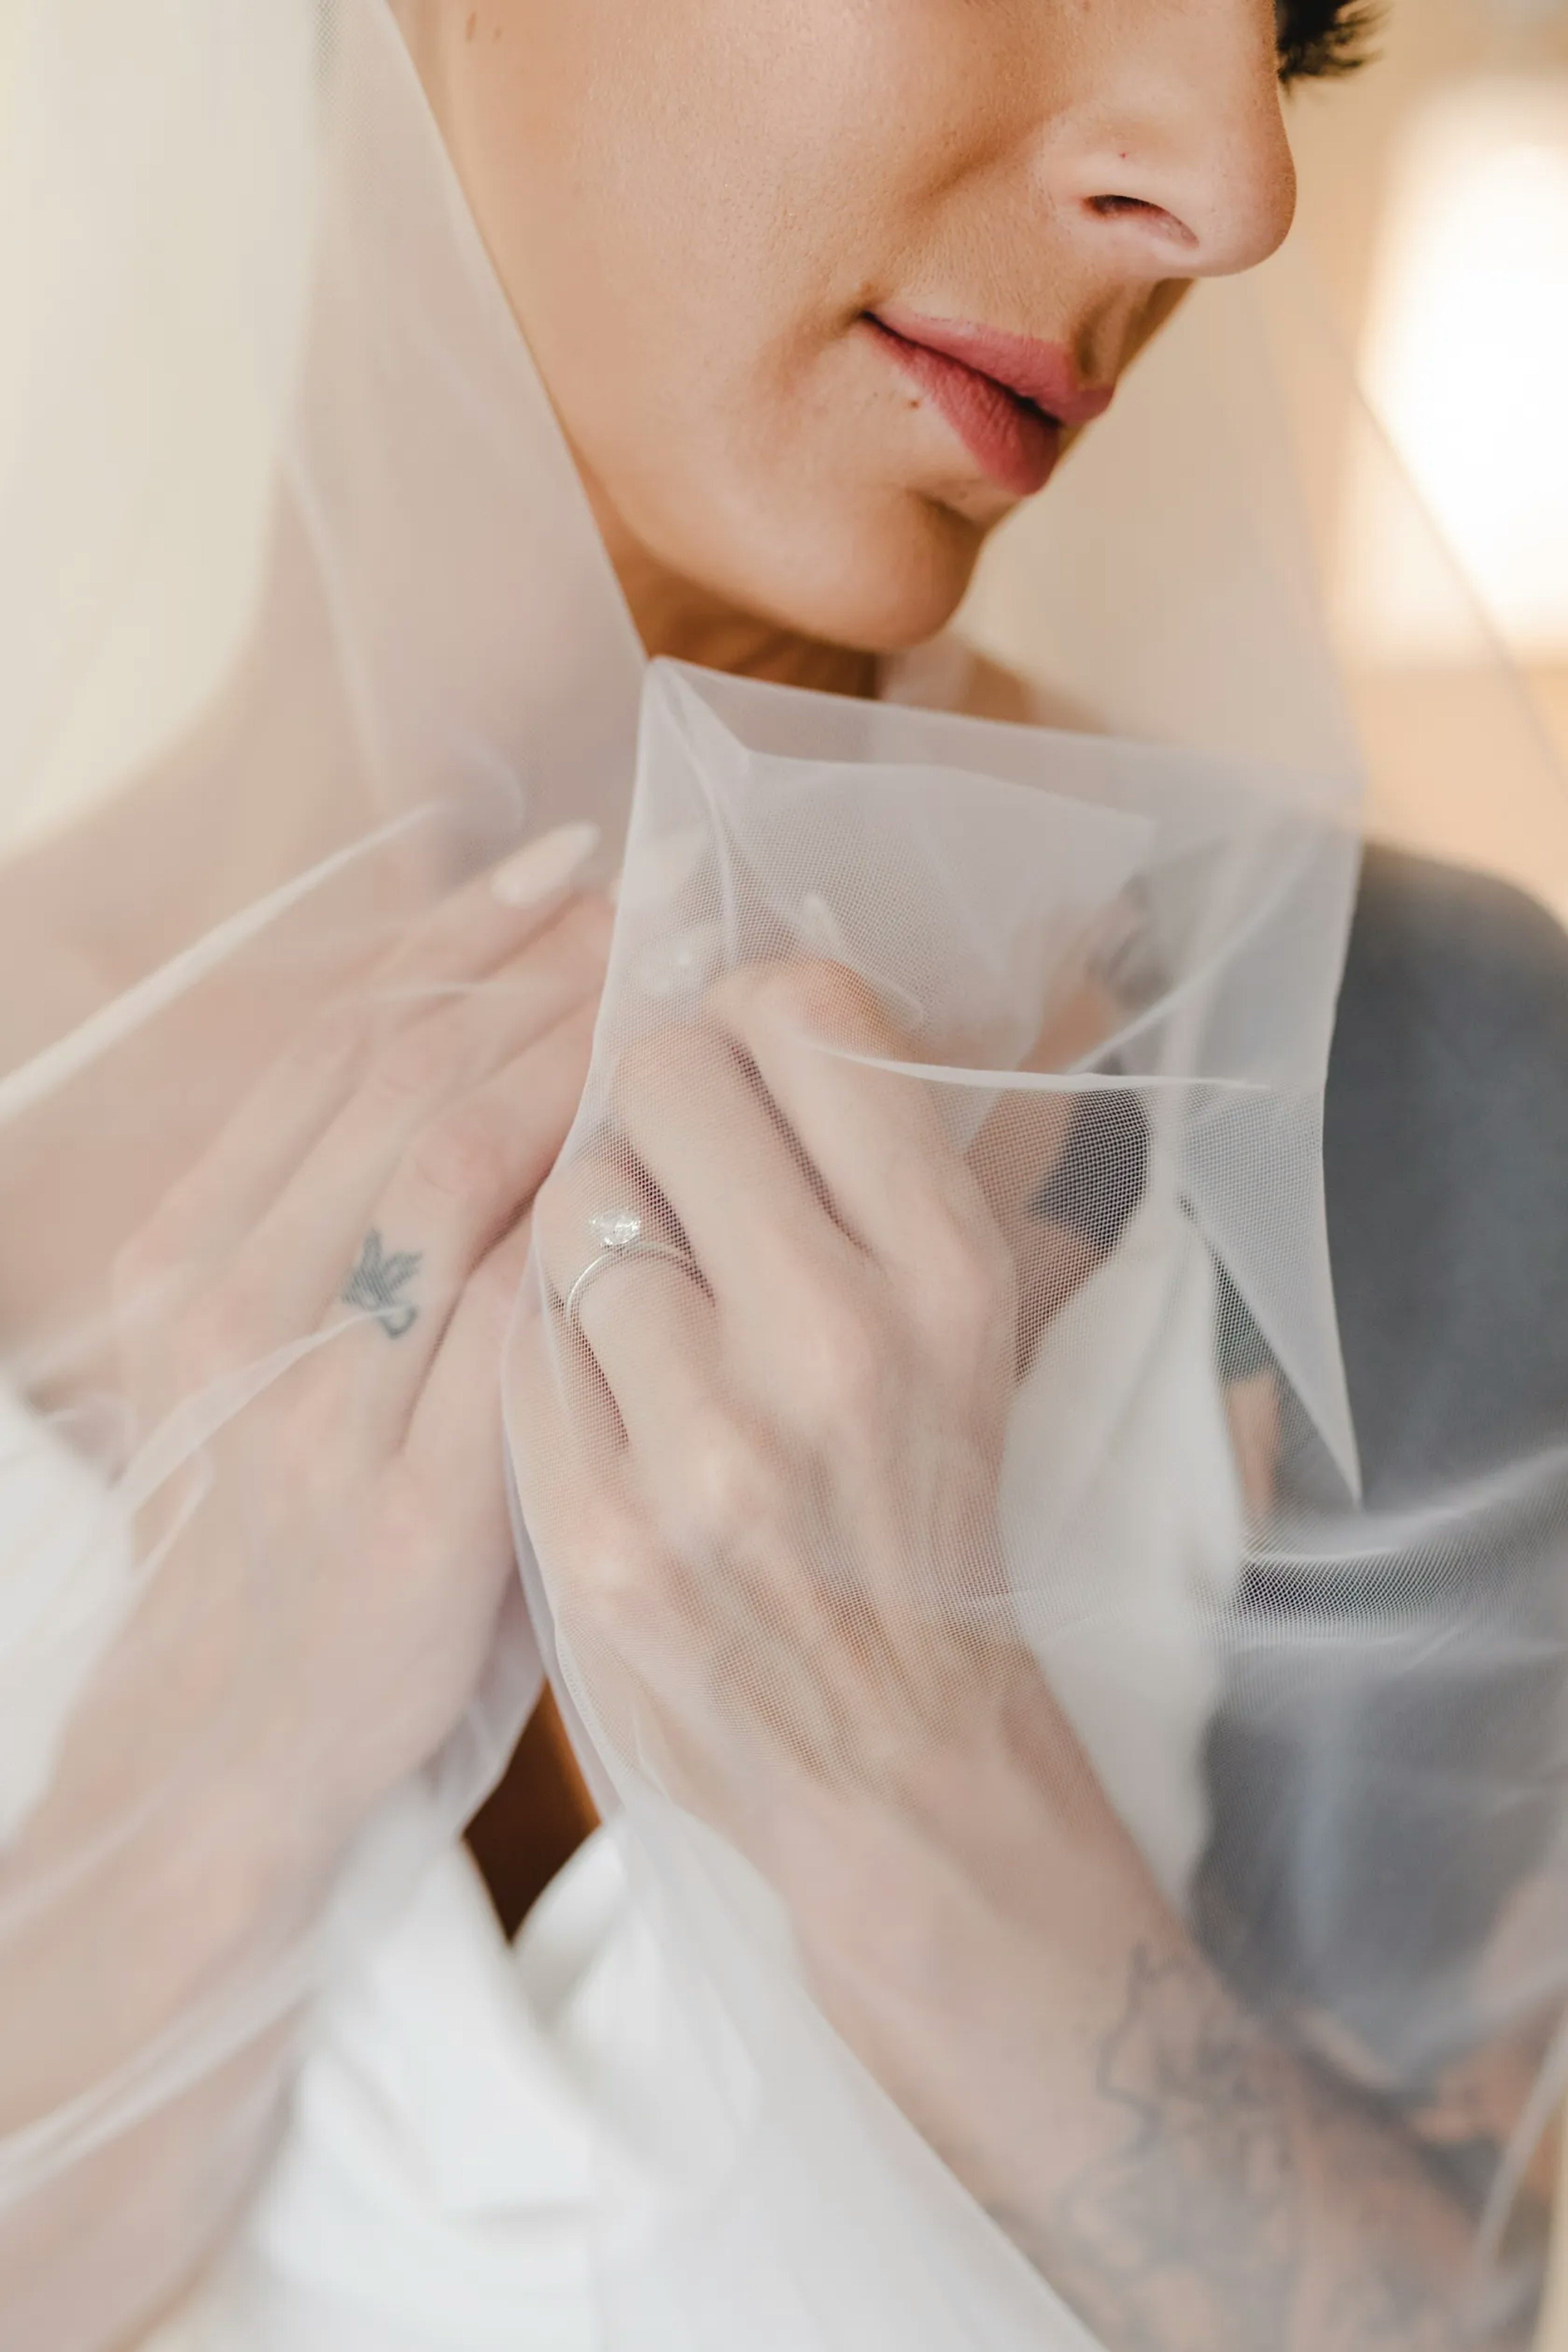 A bride in contemplation, her delicate features partly veiled, with a focus on her soft smile, a small tattoo on her shoulder, and her hand gently touching the sheer fabric of her veil.